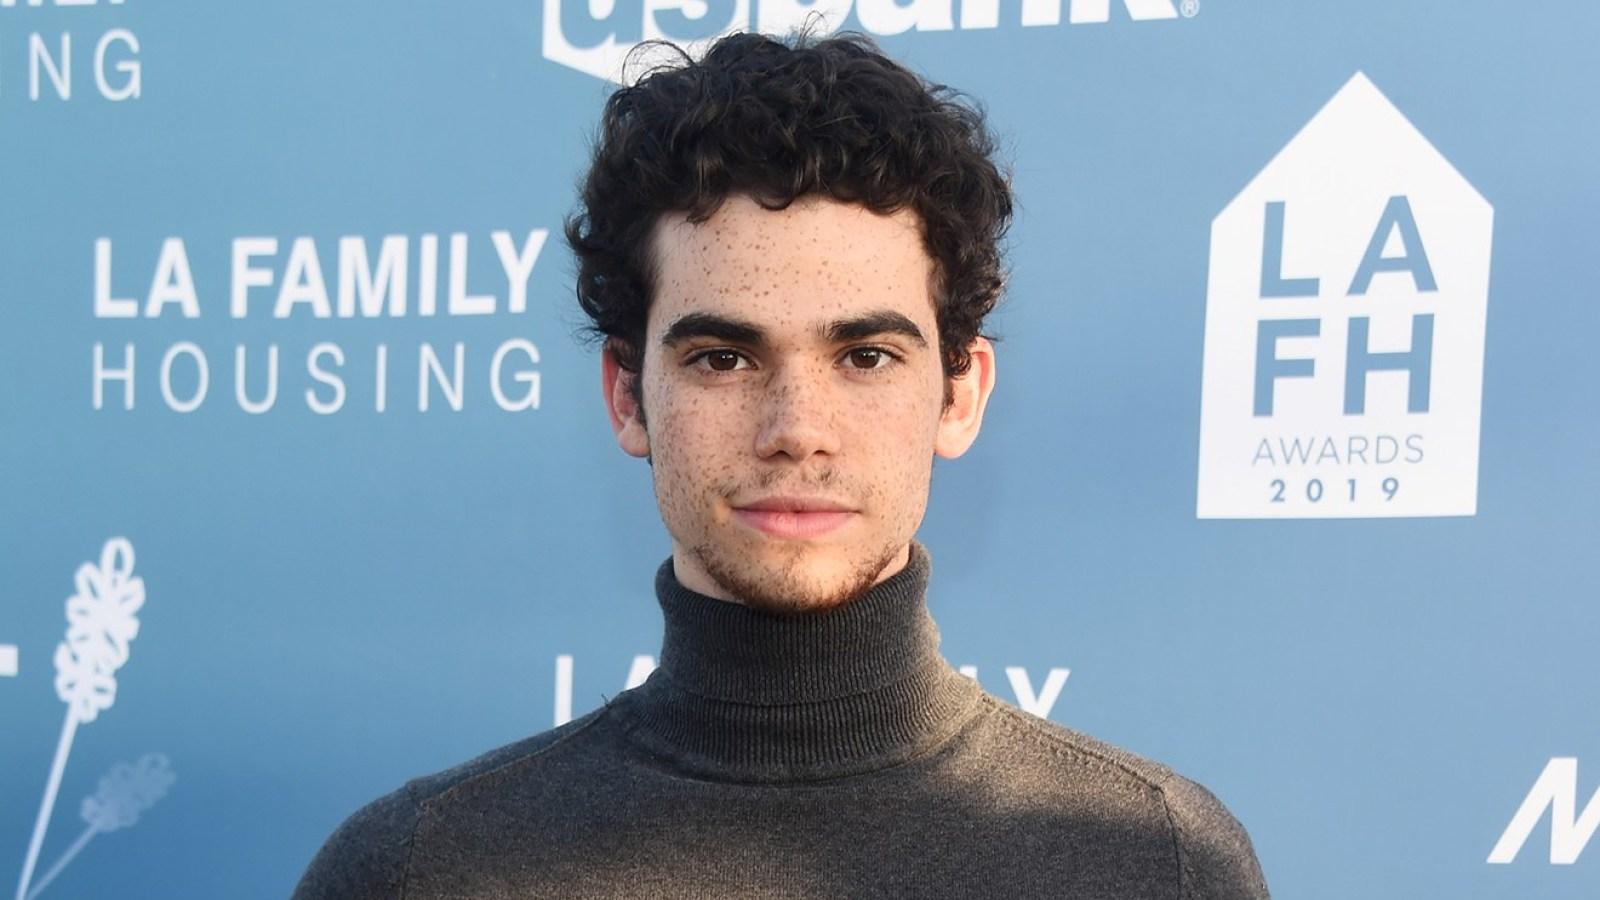 Cameron Boyce's Cause of Death Revealed